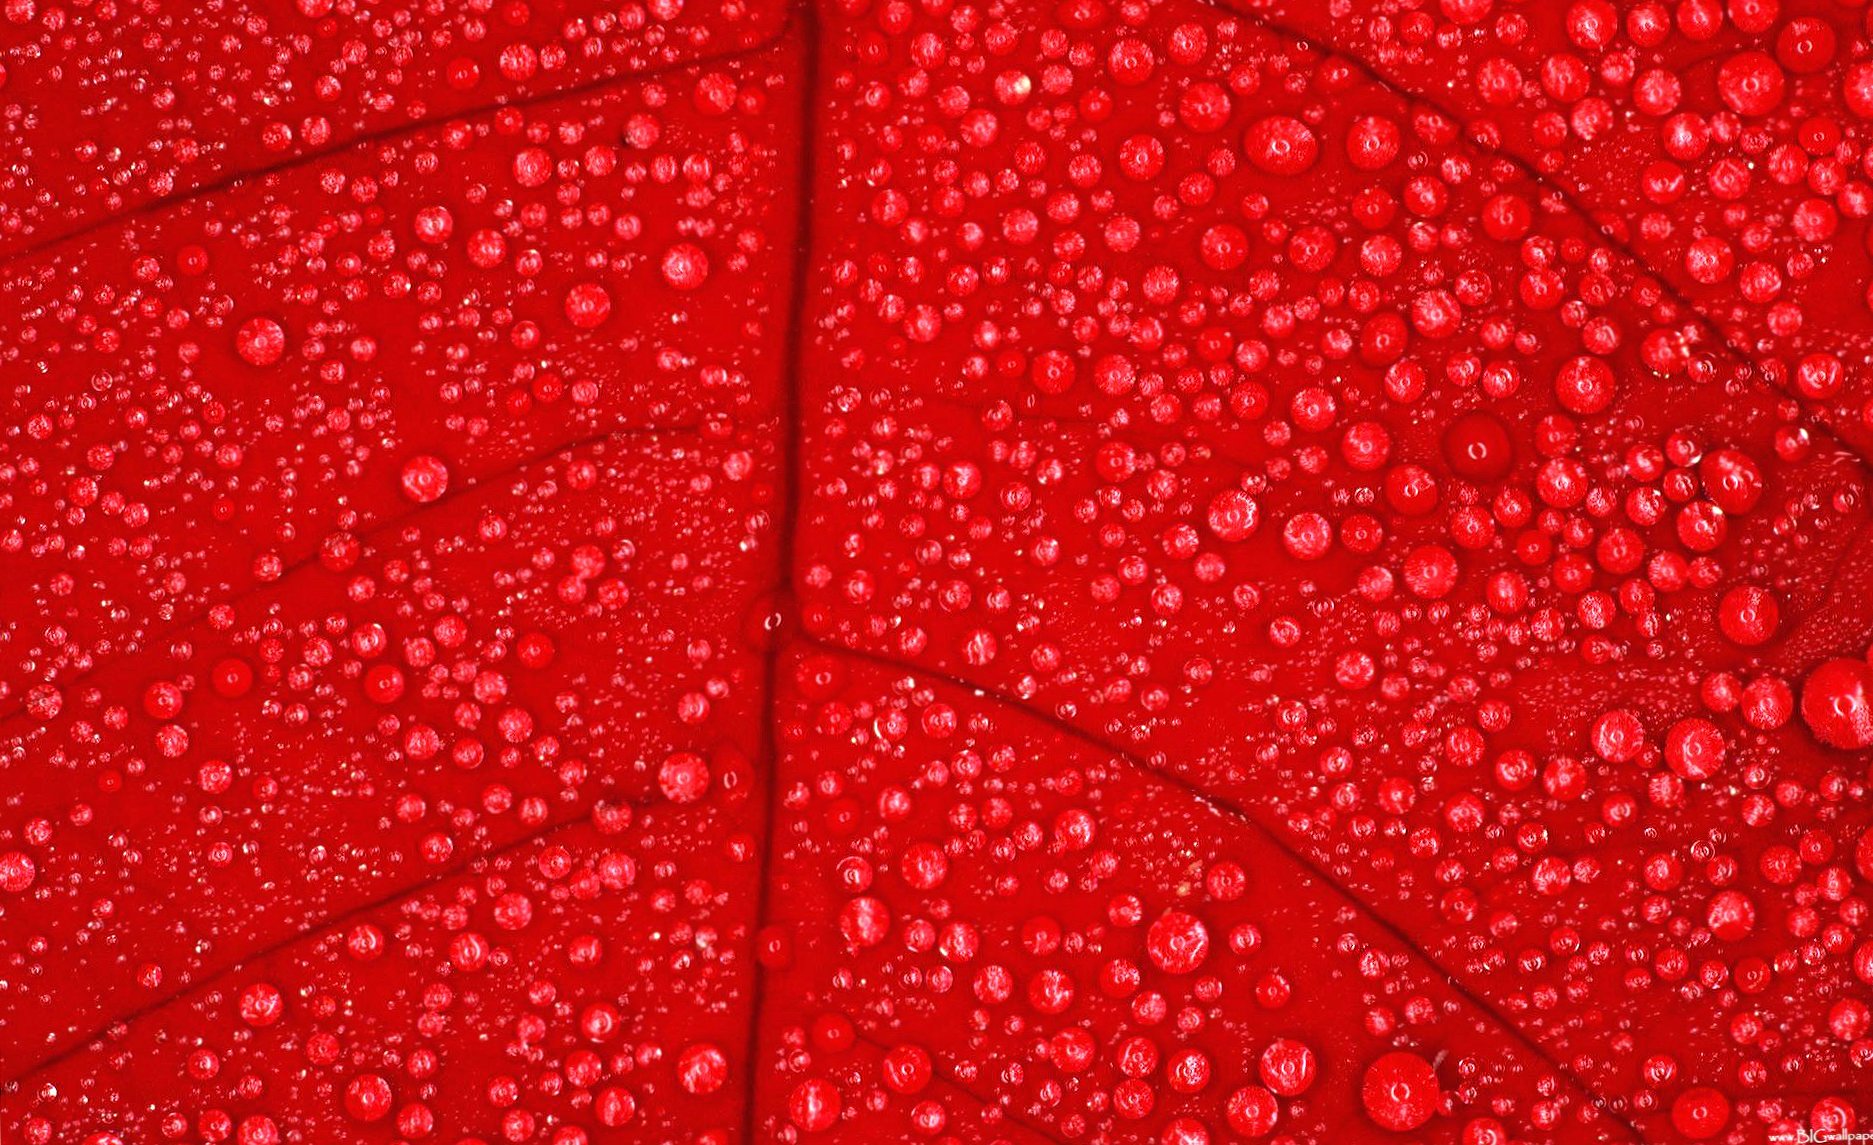 Leave red with drops wallpapers HD quality